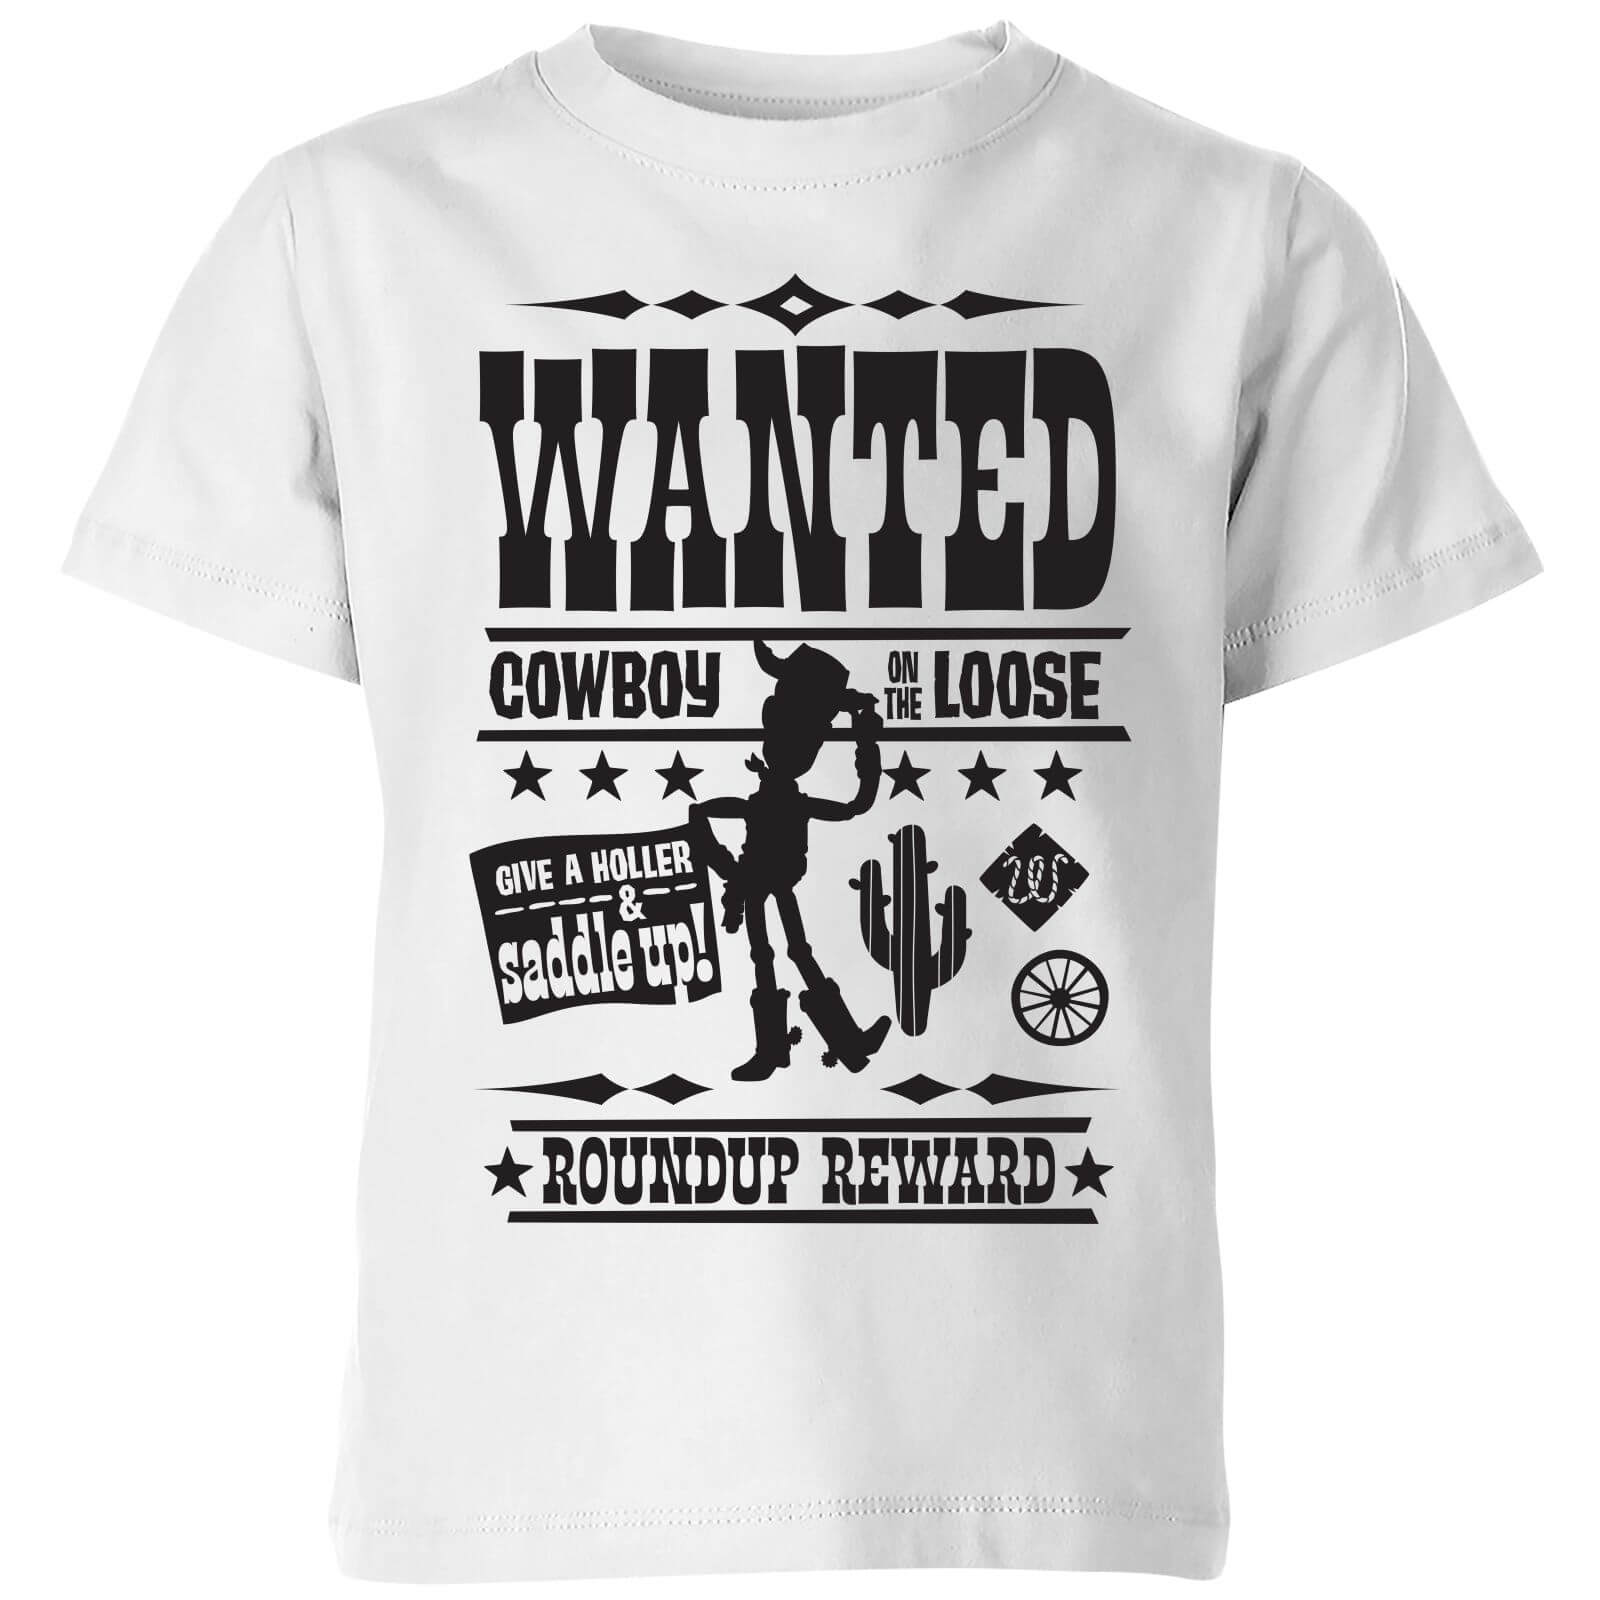 Pixar Toy Story Wanted Poster Kids' T-Shirt - White - 9-10 Years - White